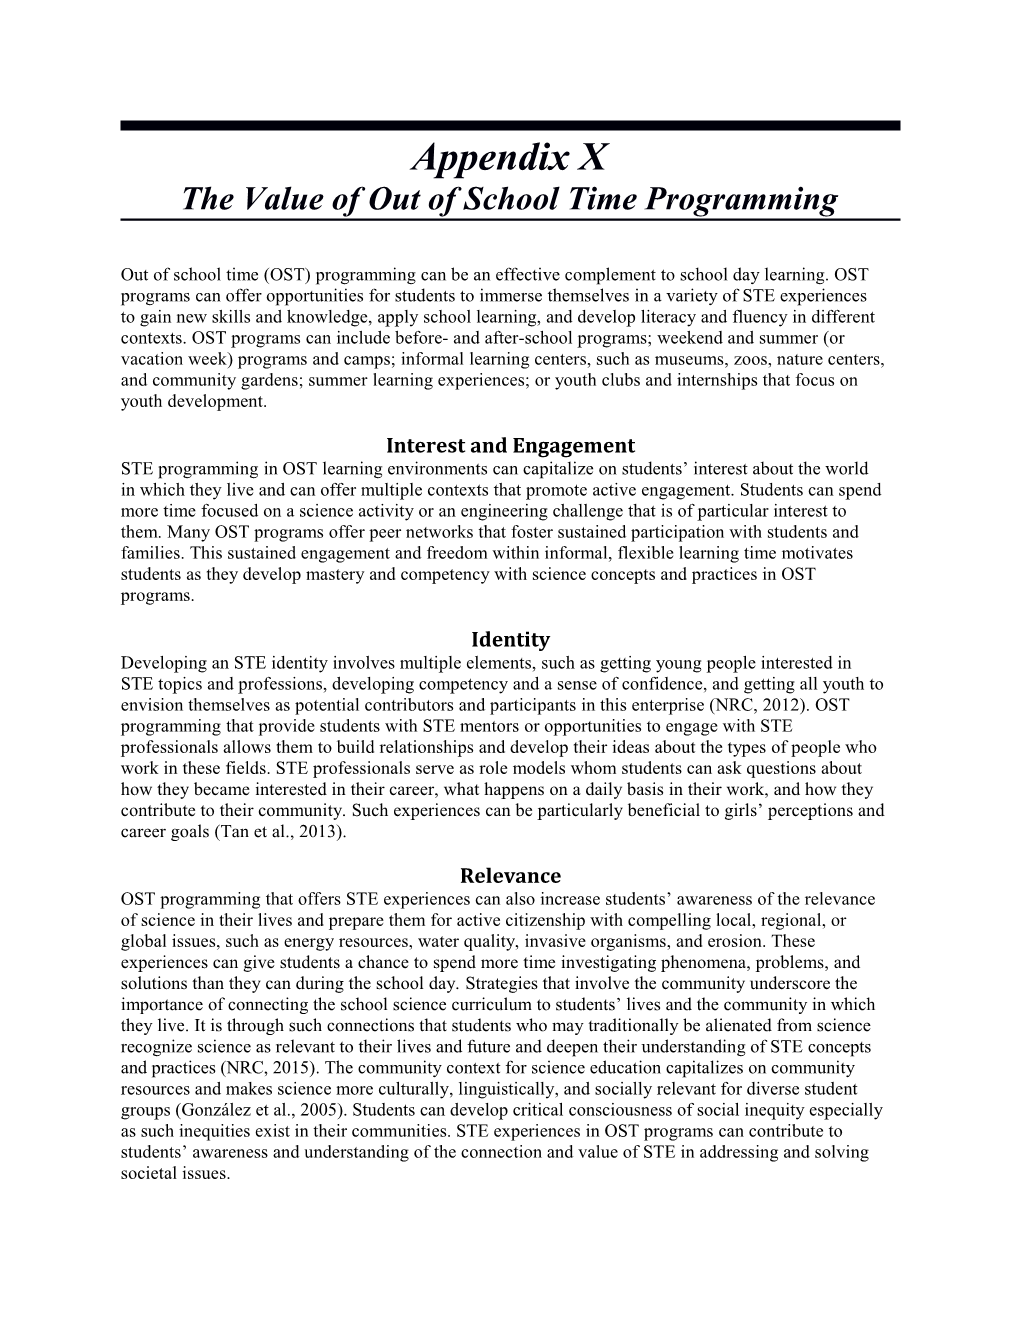 Appendix X: the Value of out of School Time Programming